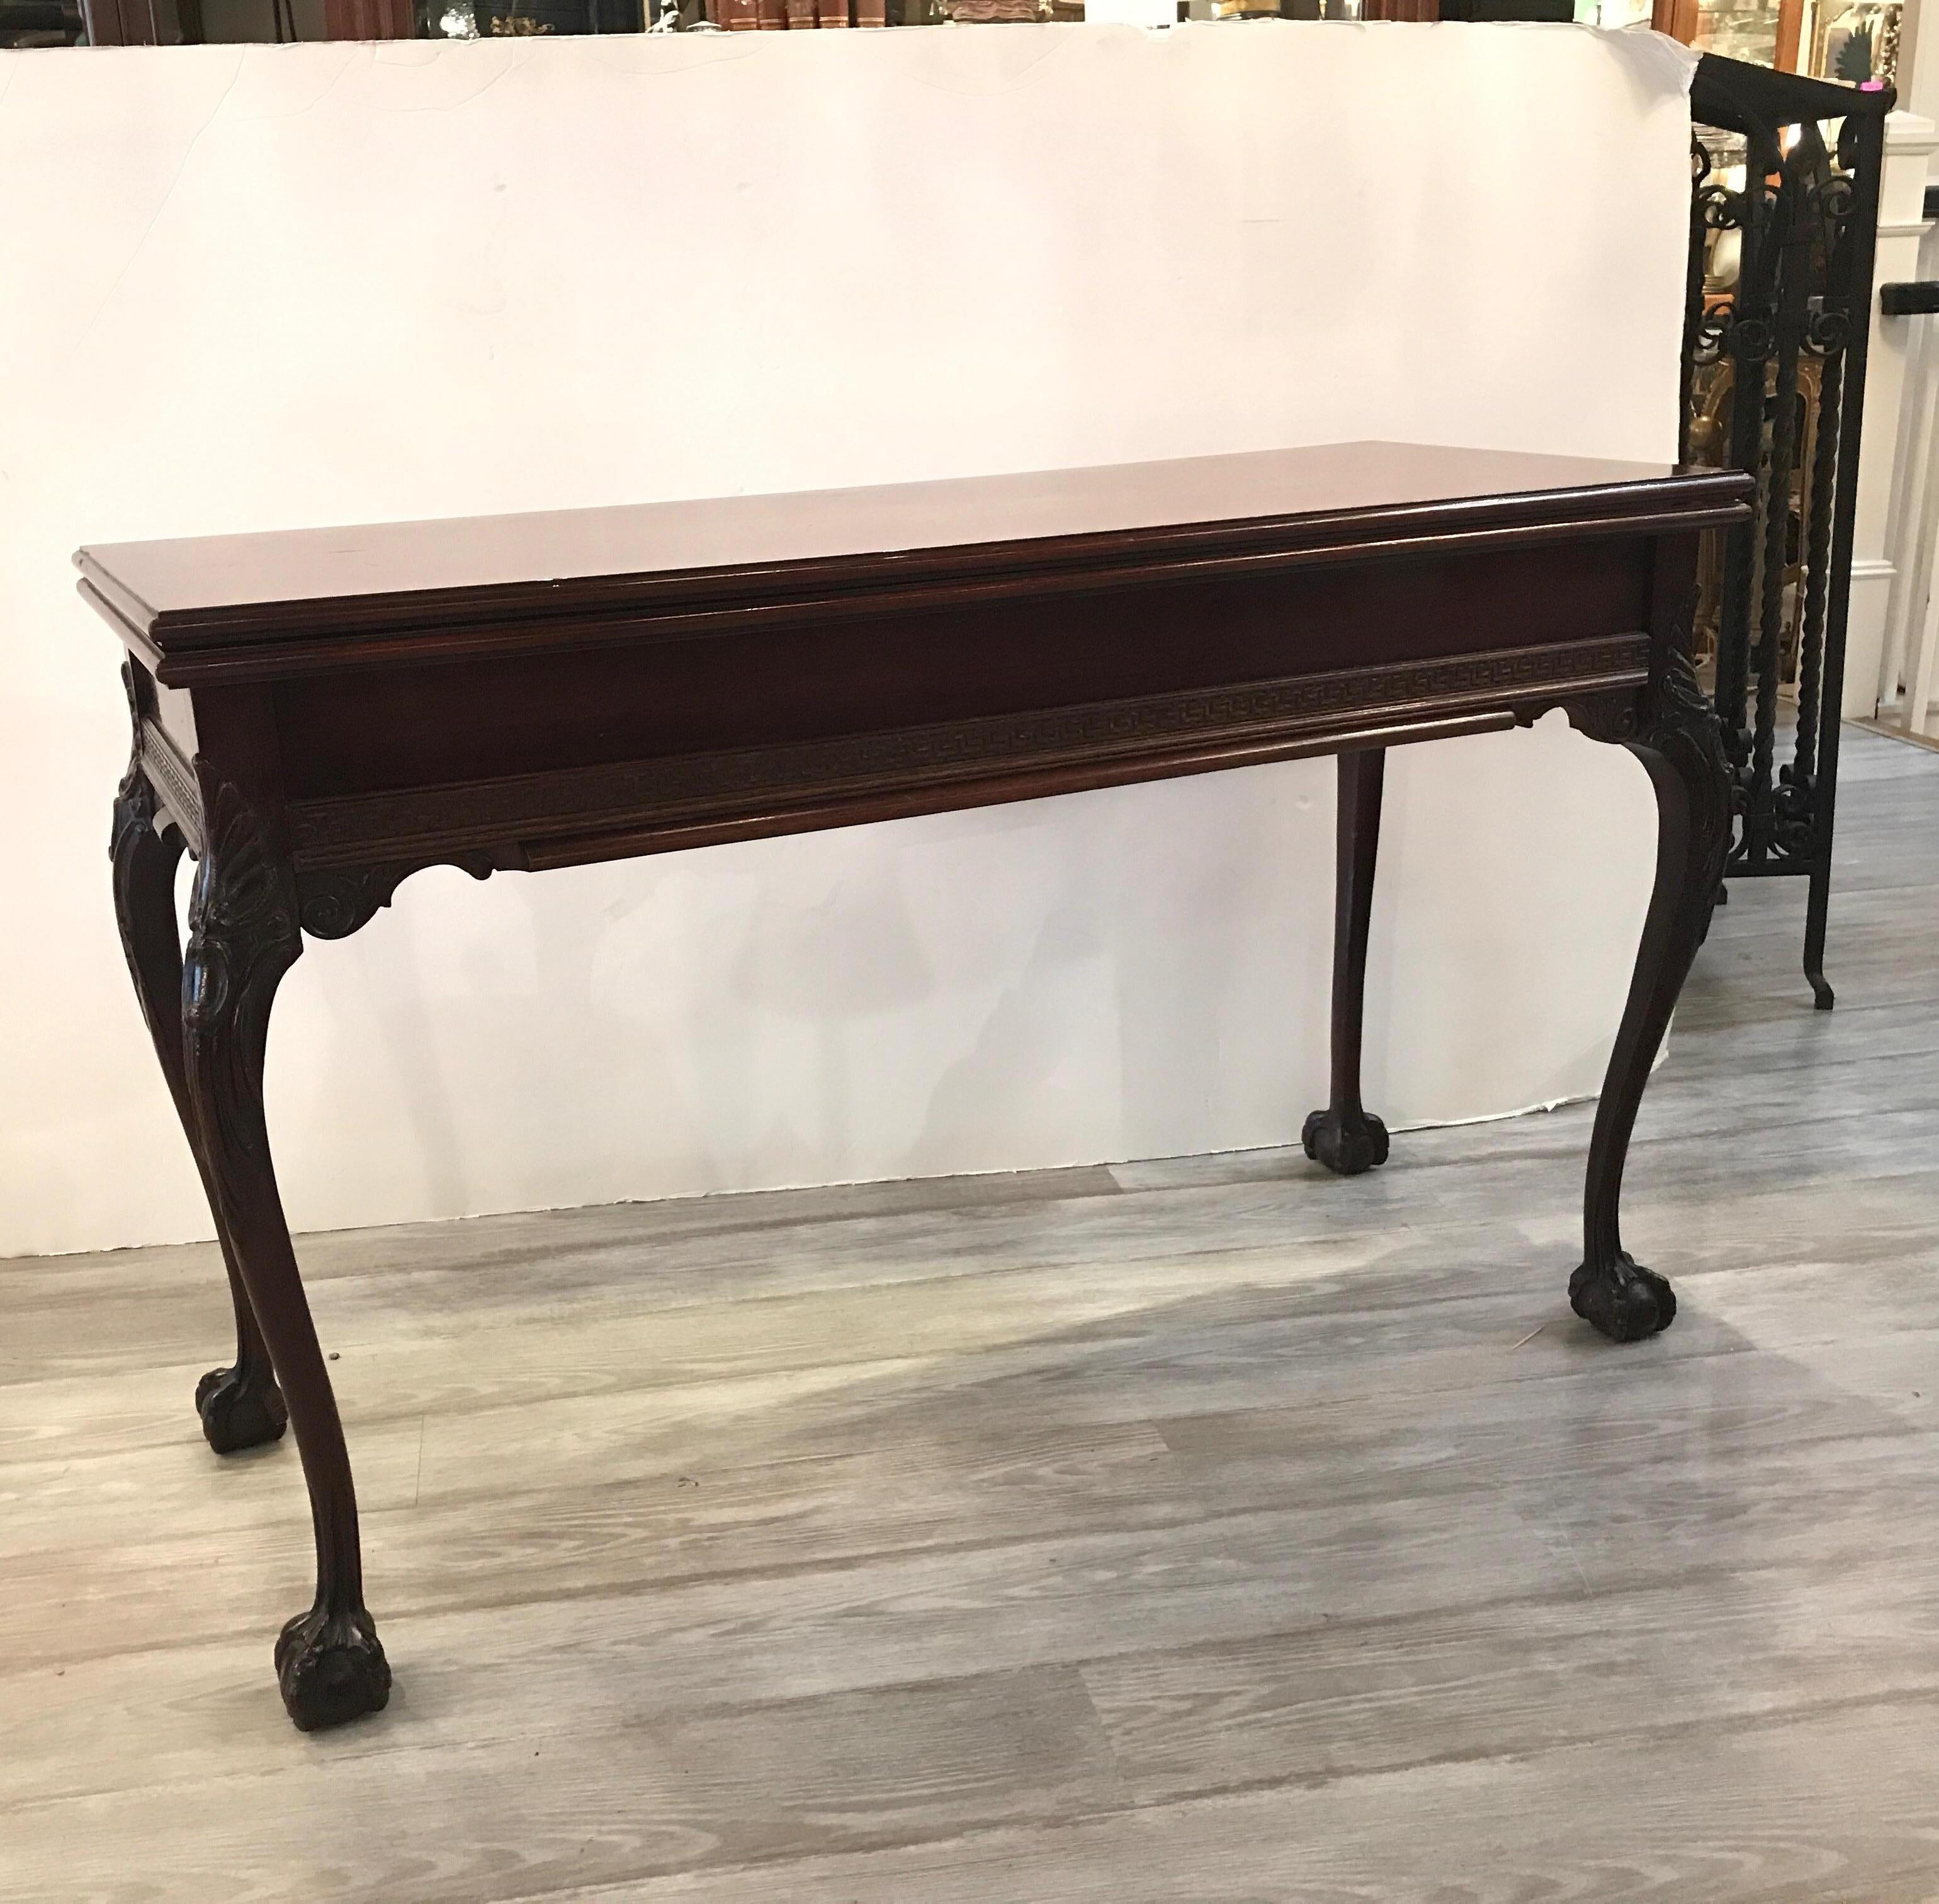 Wonderful Chippendale style mahogany console table that opes to a dining table. The top flips open to double the surface. The two side legs pullout / pull-out to open the table even large with three 11.5 inch leaves. The top flips and you attach the